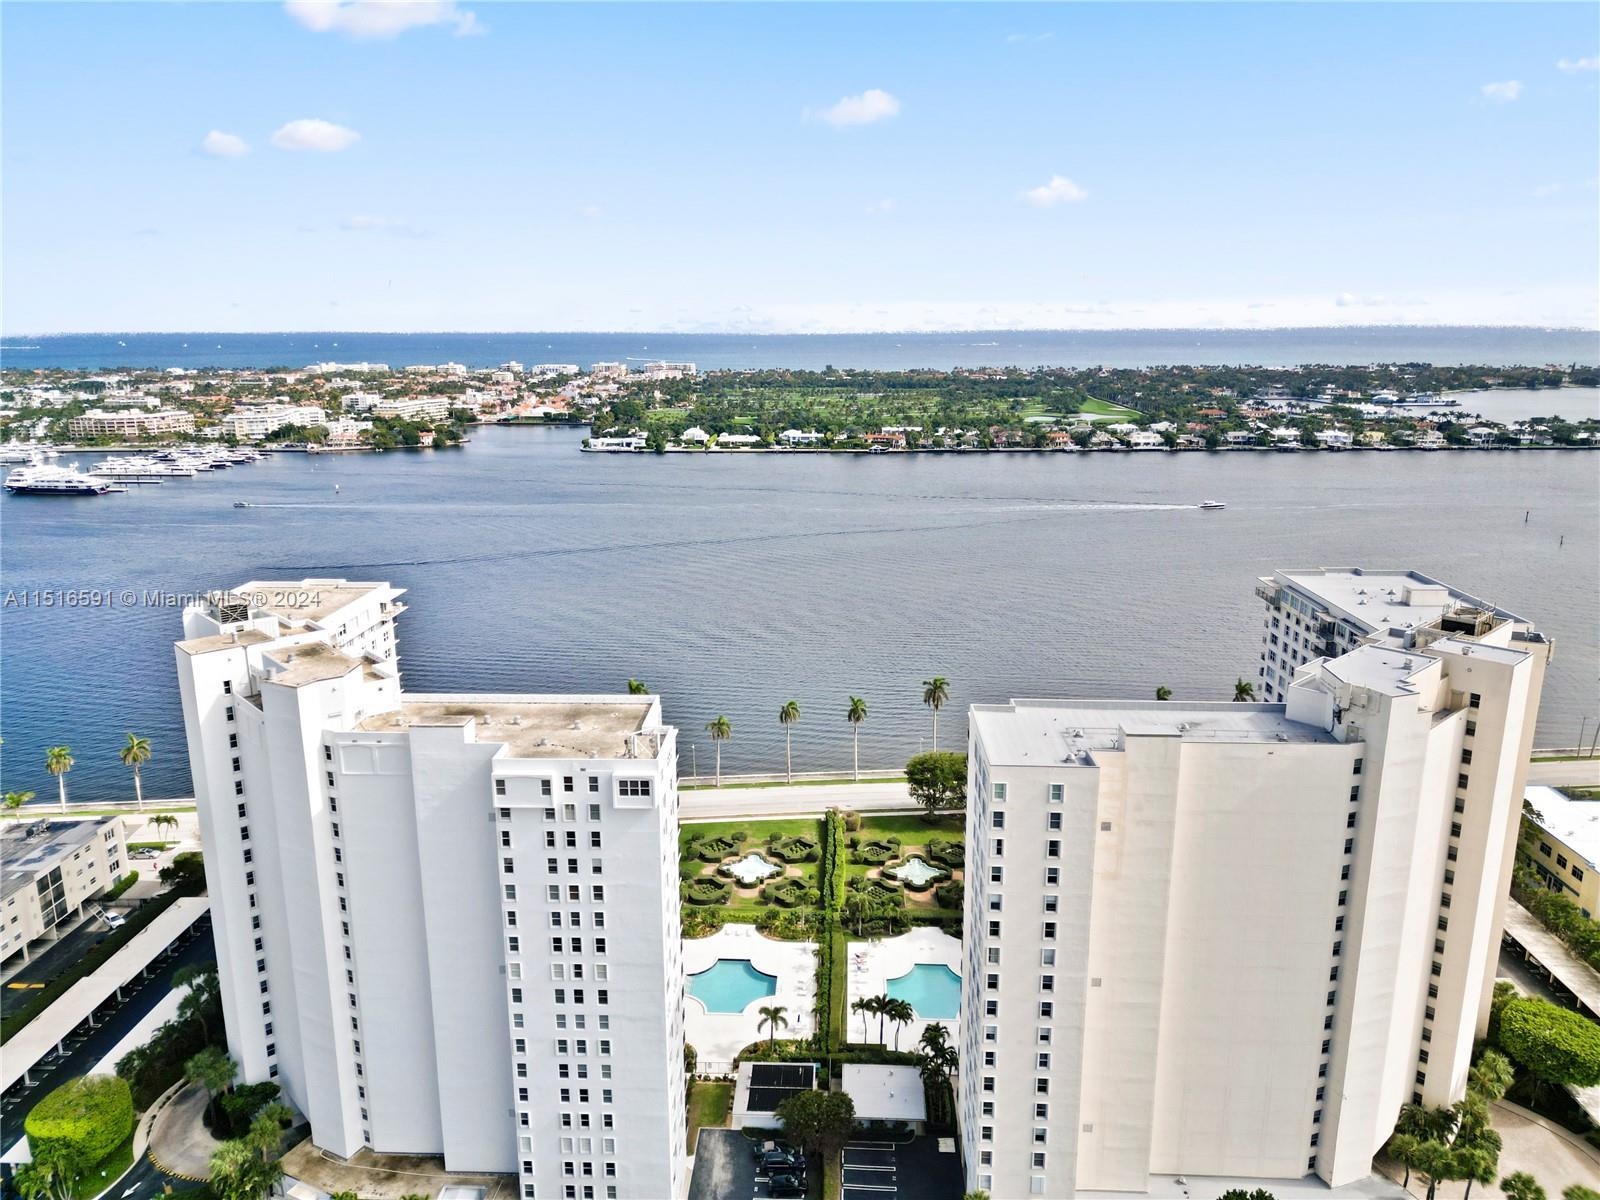 Immerse yourself in the stunning Intracoastal views. Introducing a stunning 2-bedroom, 2-bathroom co